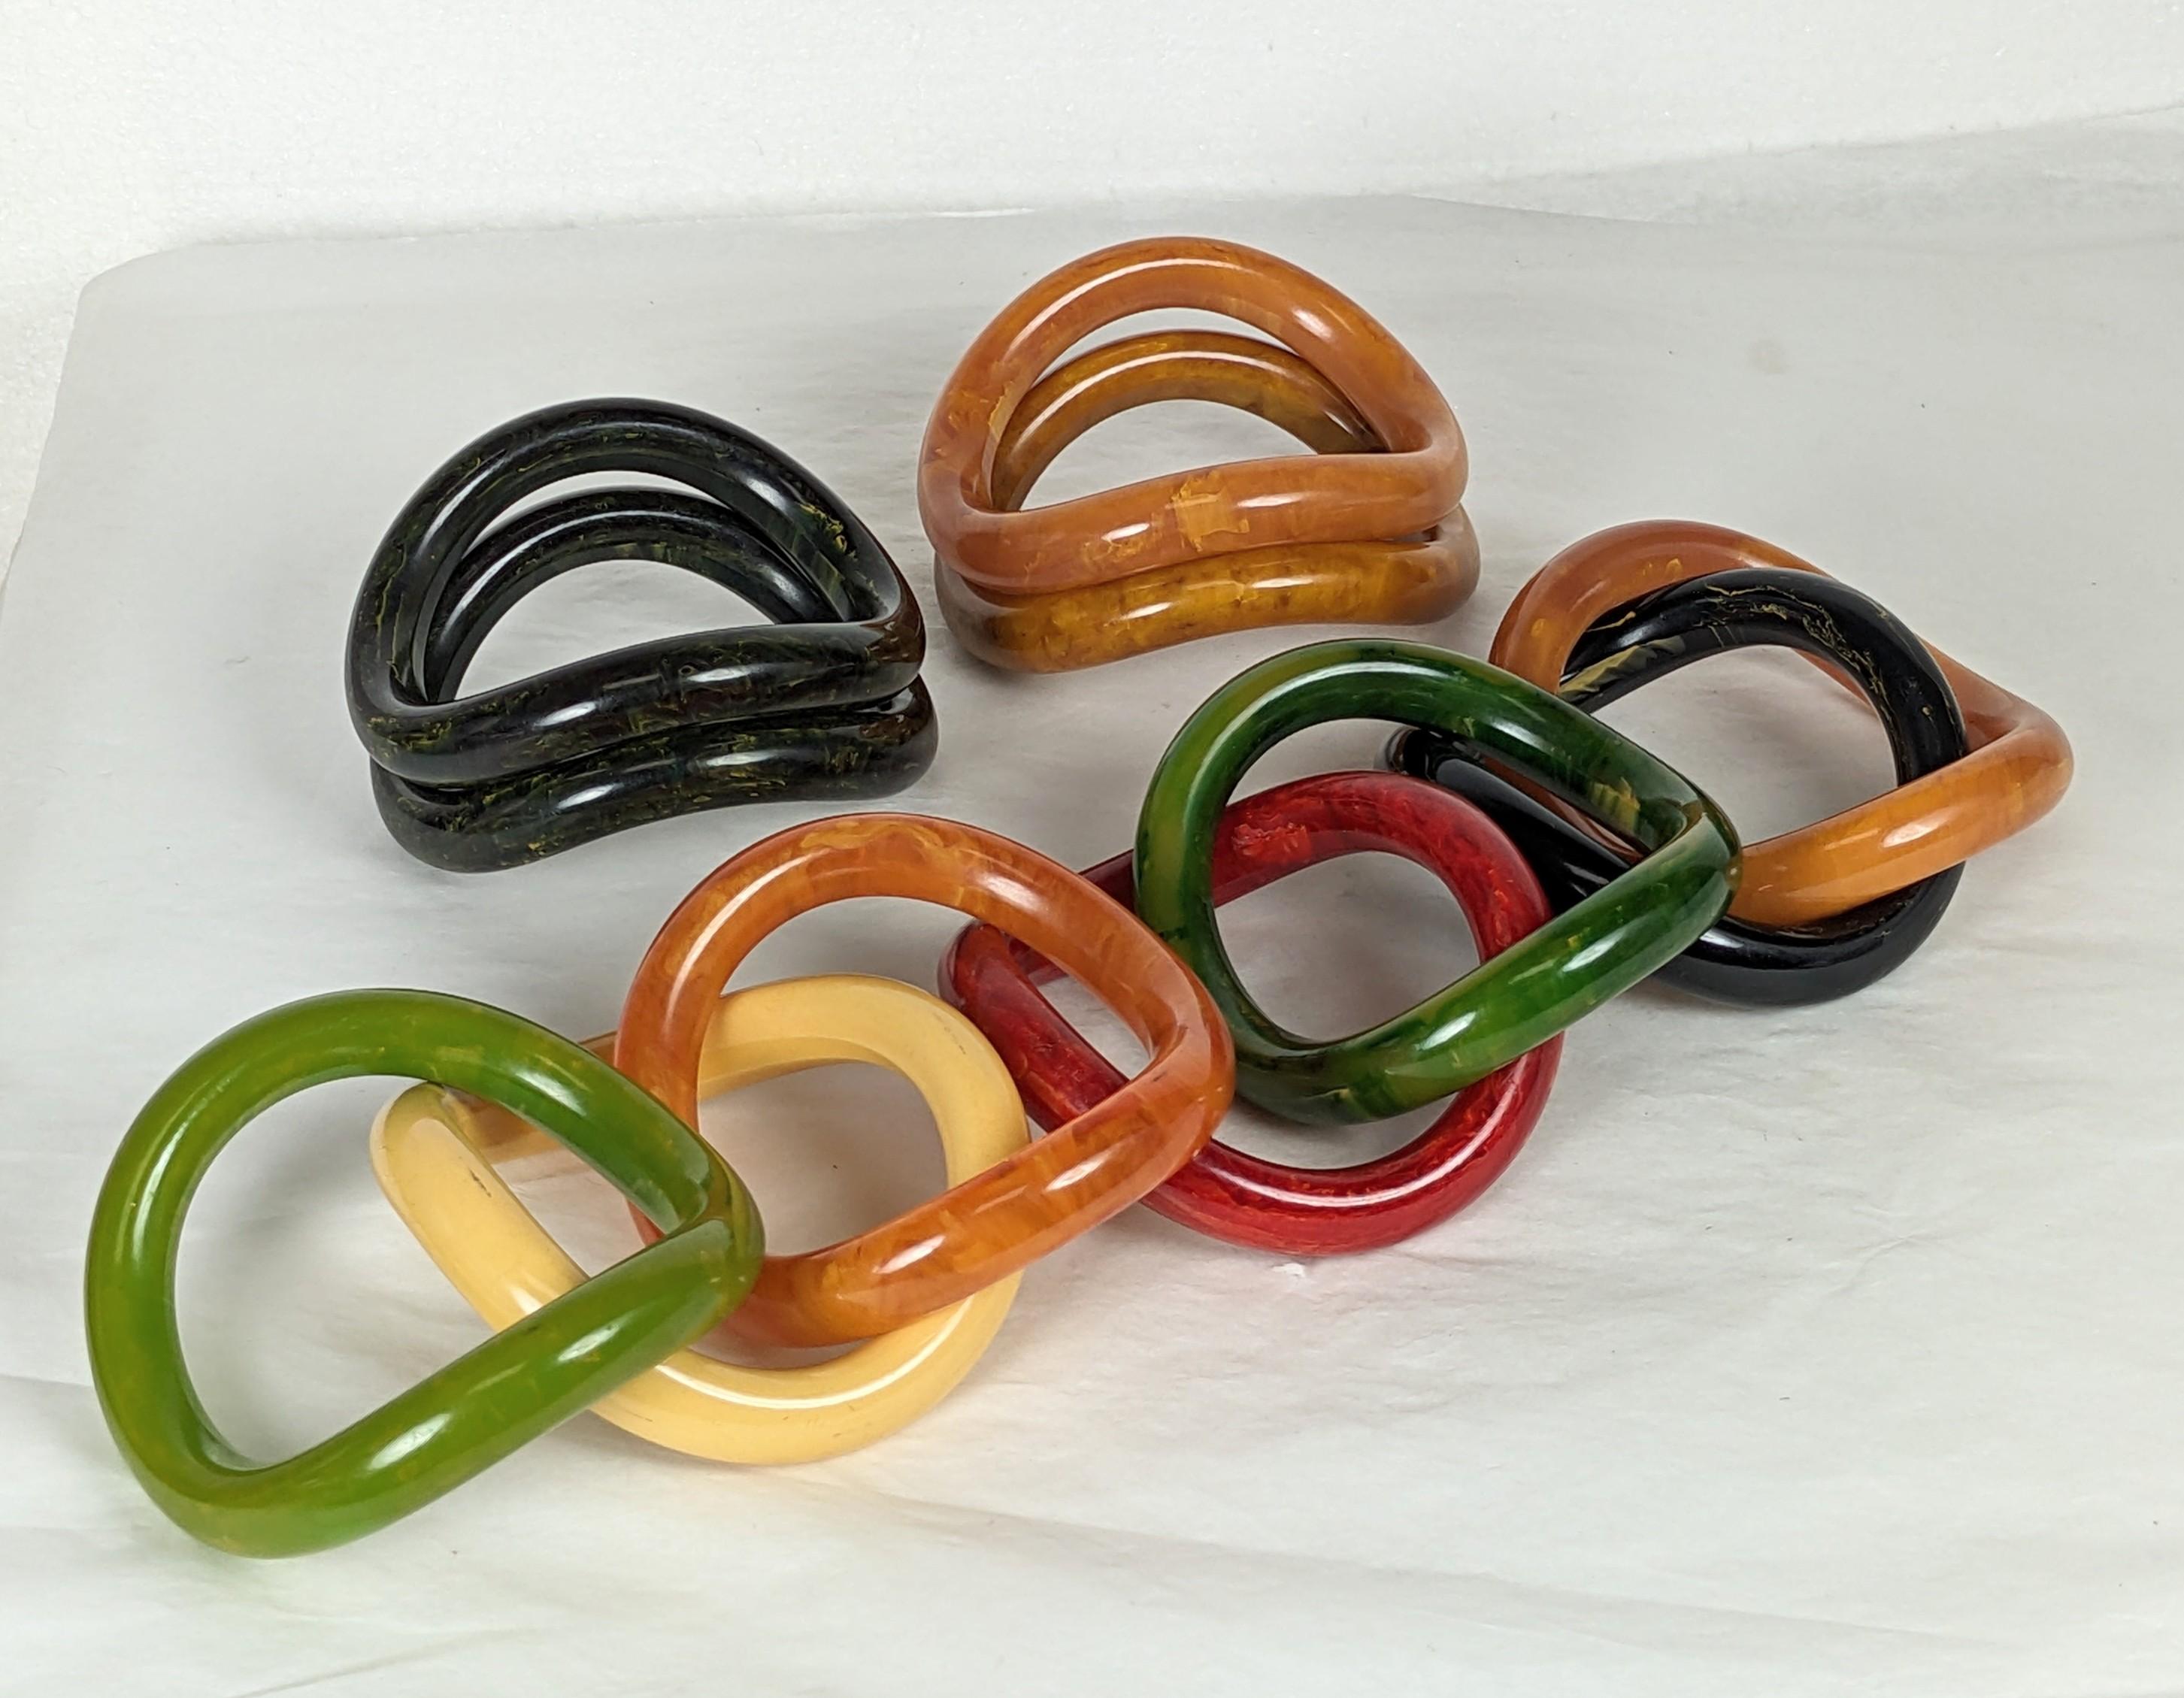 Collection of End of Day Bakelite Squiggle Bracelets from the 1960's likely made of bakelite from an earlier period. Each is shaped like a potato chip and stack perfectly on top of each other. Wonderful colorations which work beautifully in a